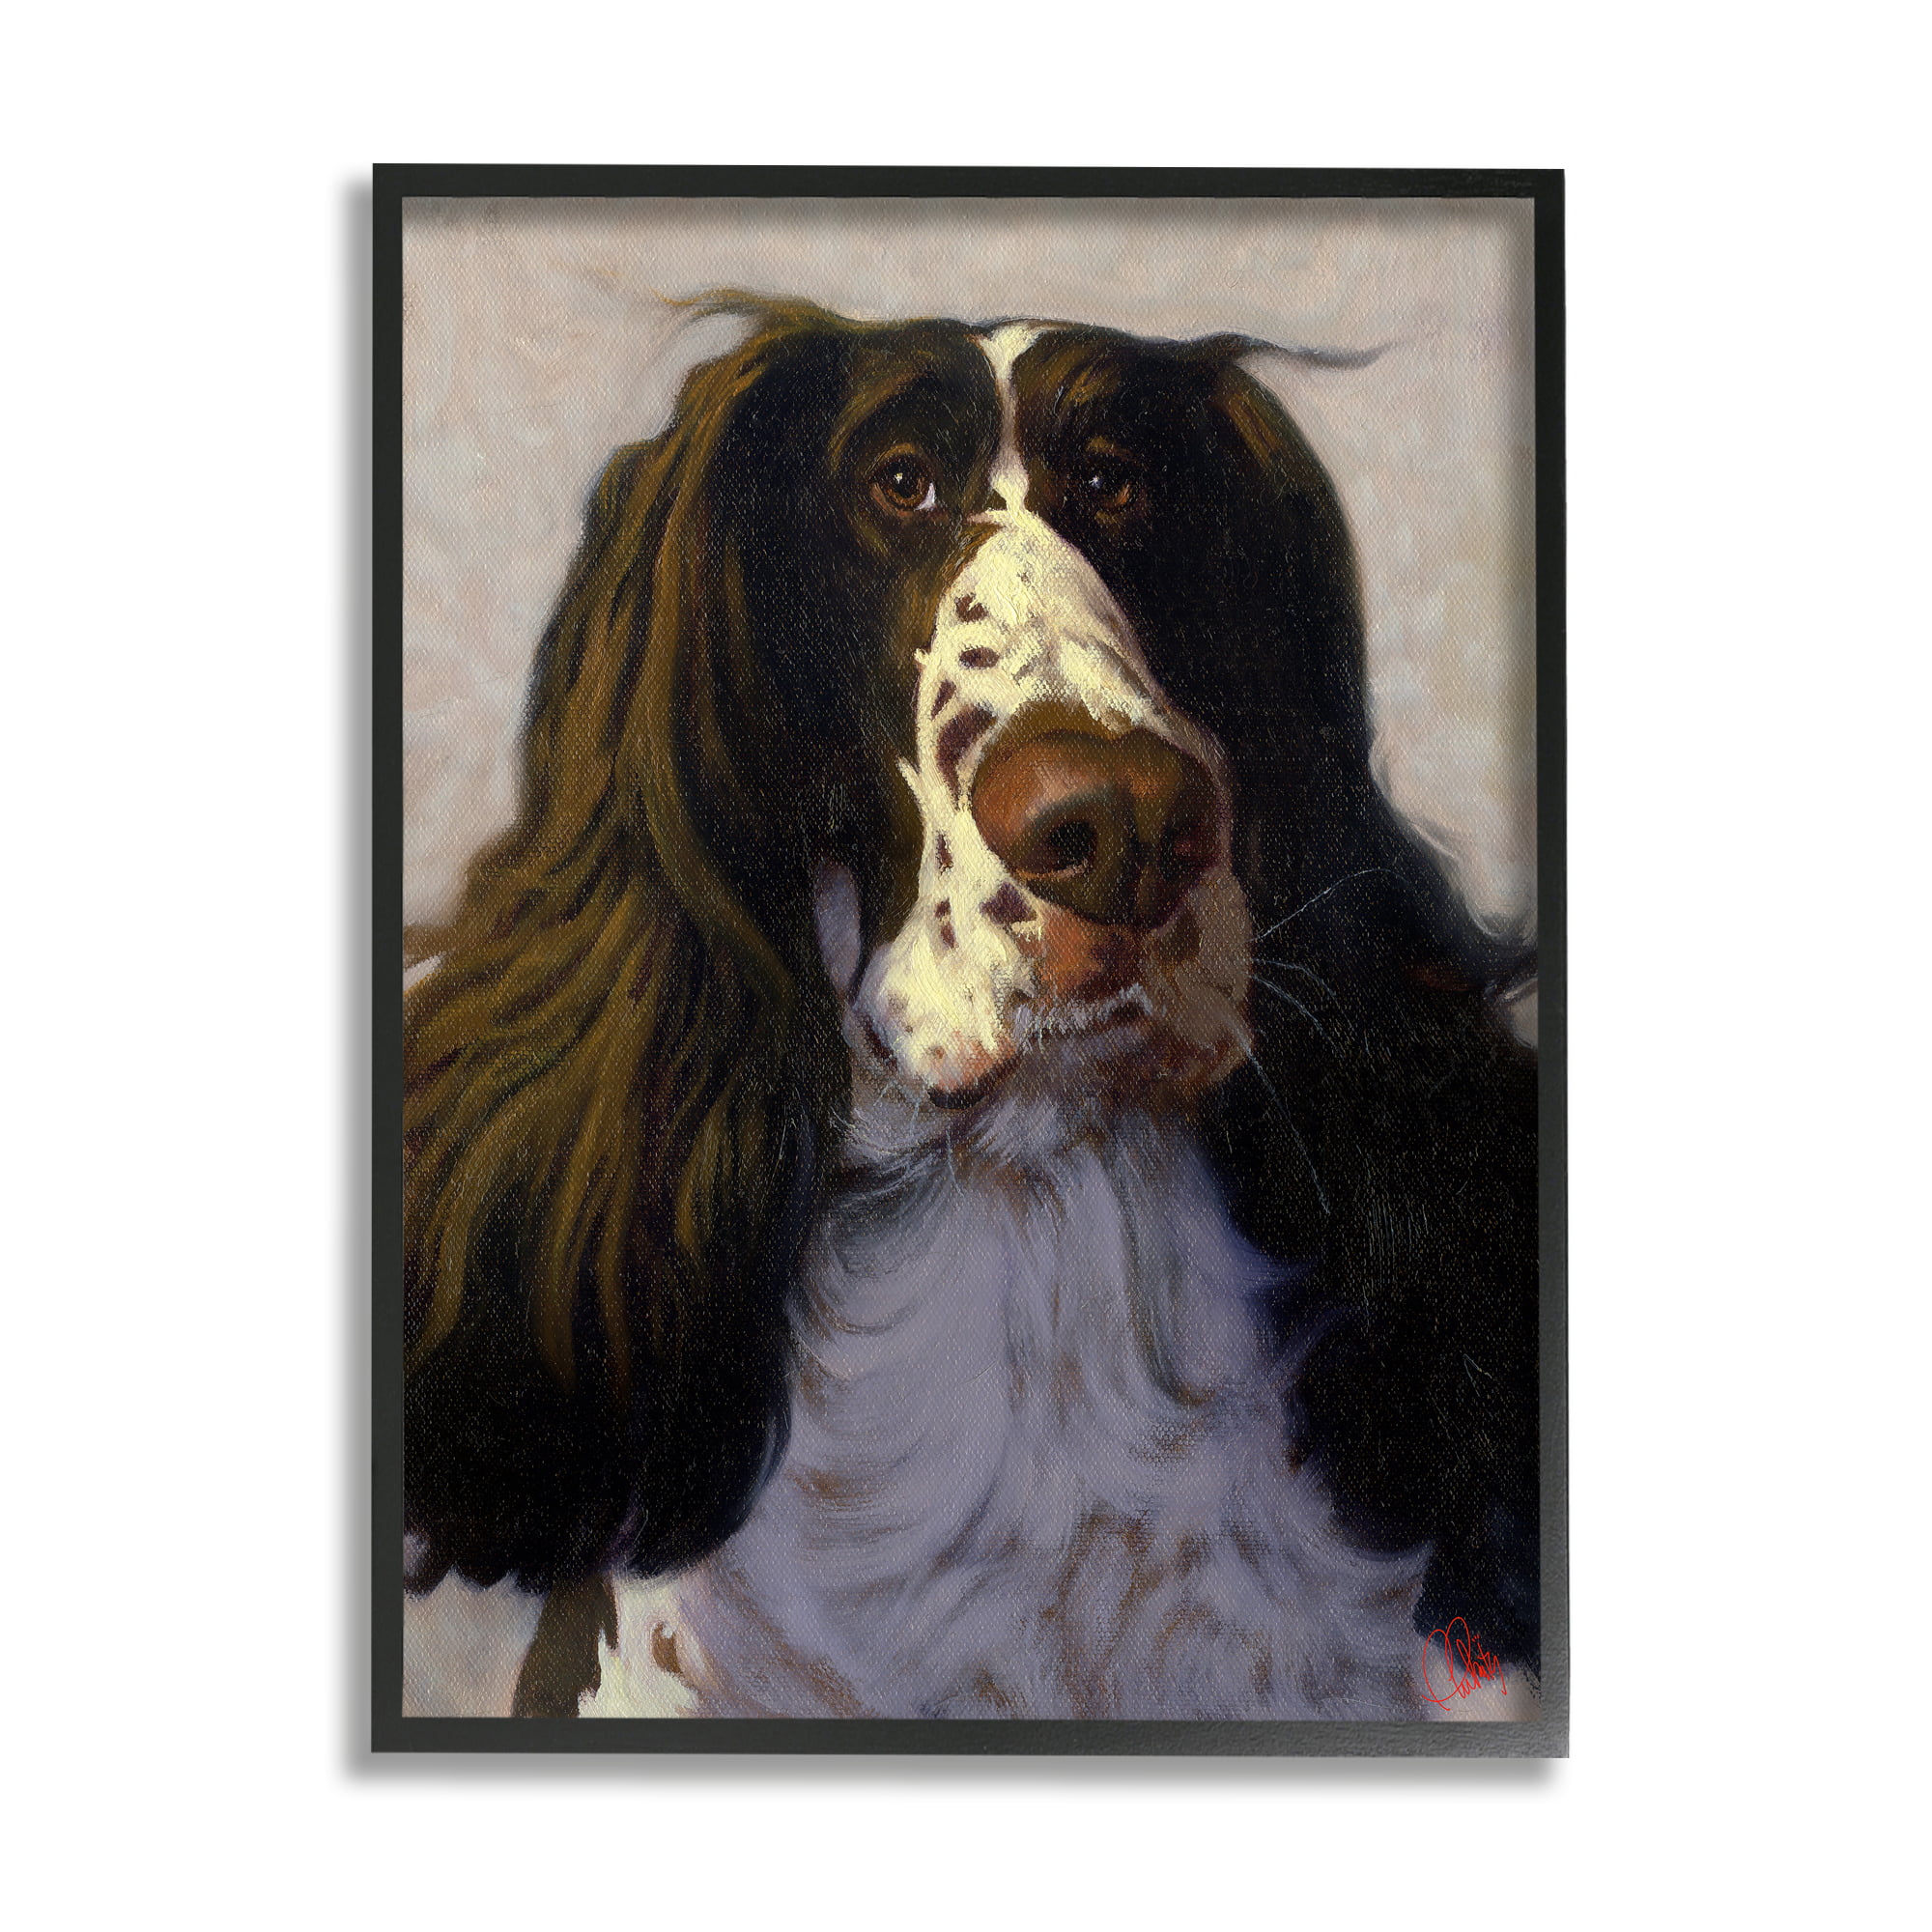 Stupell Industries Hound Dog Pet Portrait Funny Animal Painting, 16 x 20,  Design by Thomas Fluharty - Walmart.com